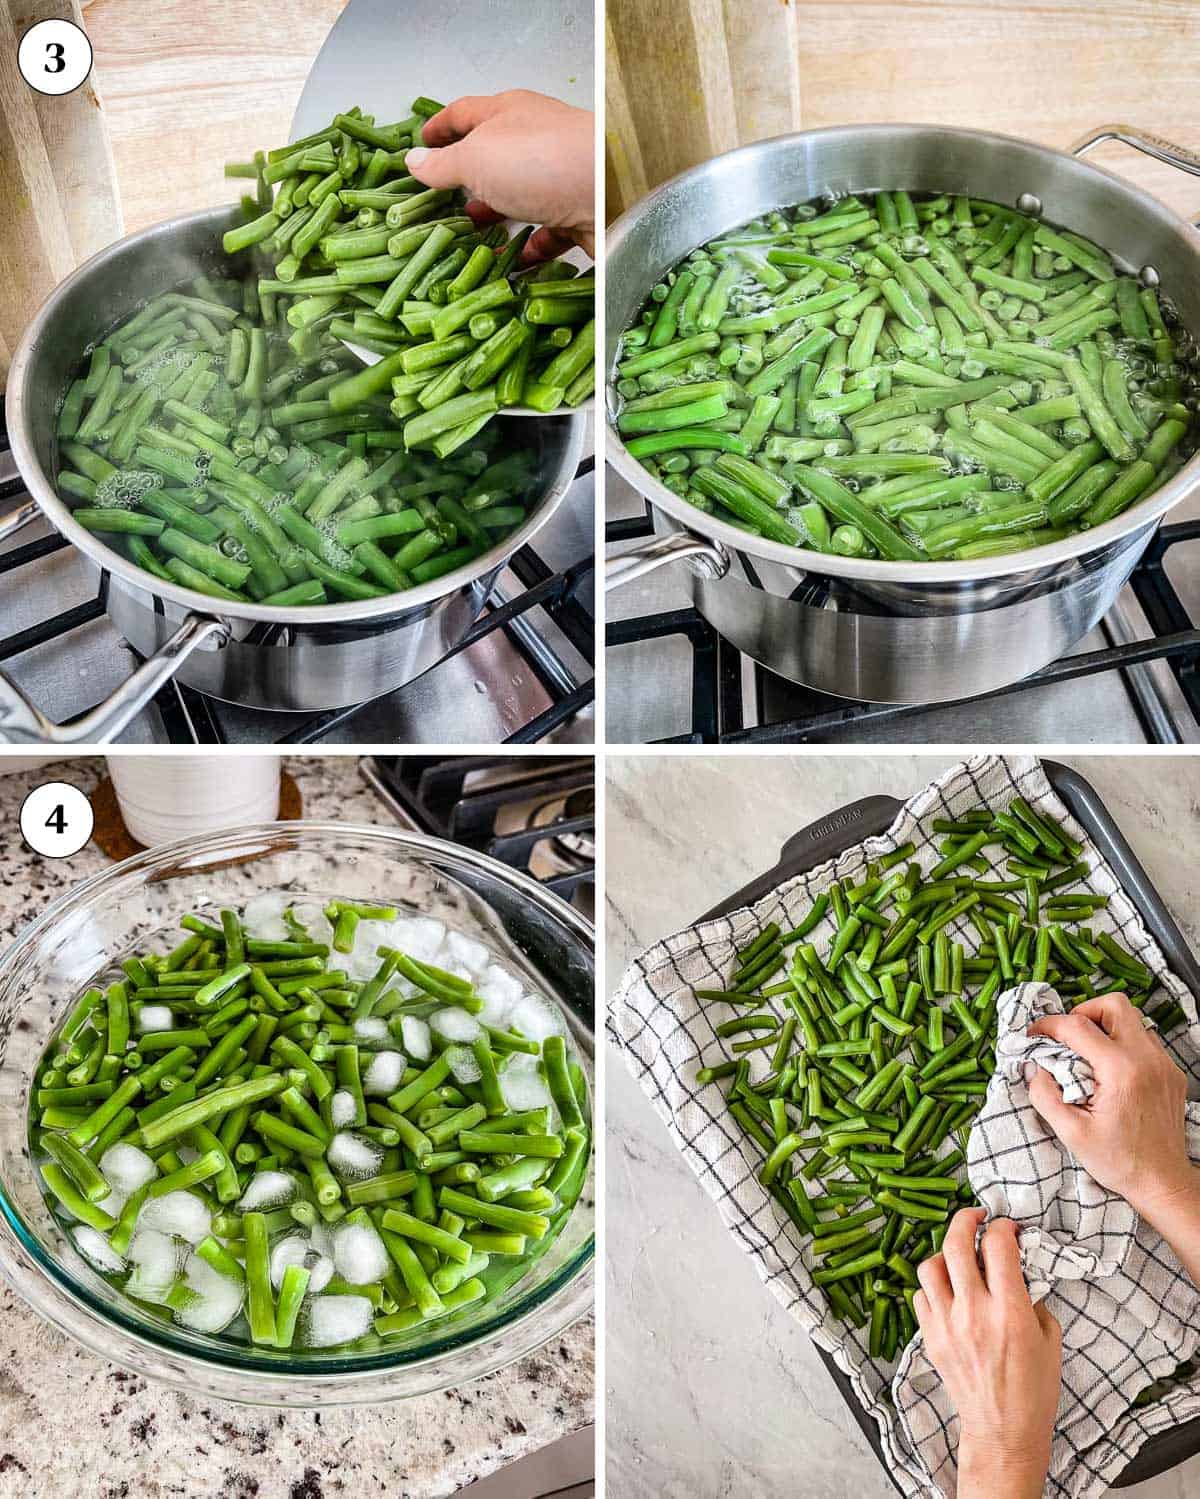 Person blanching green beans to prepare for making green bean casserole.